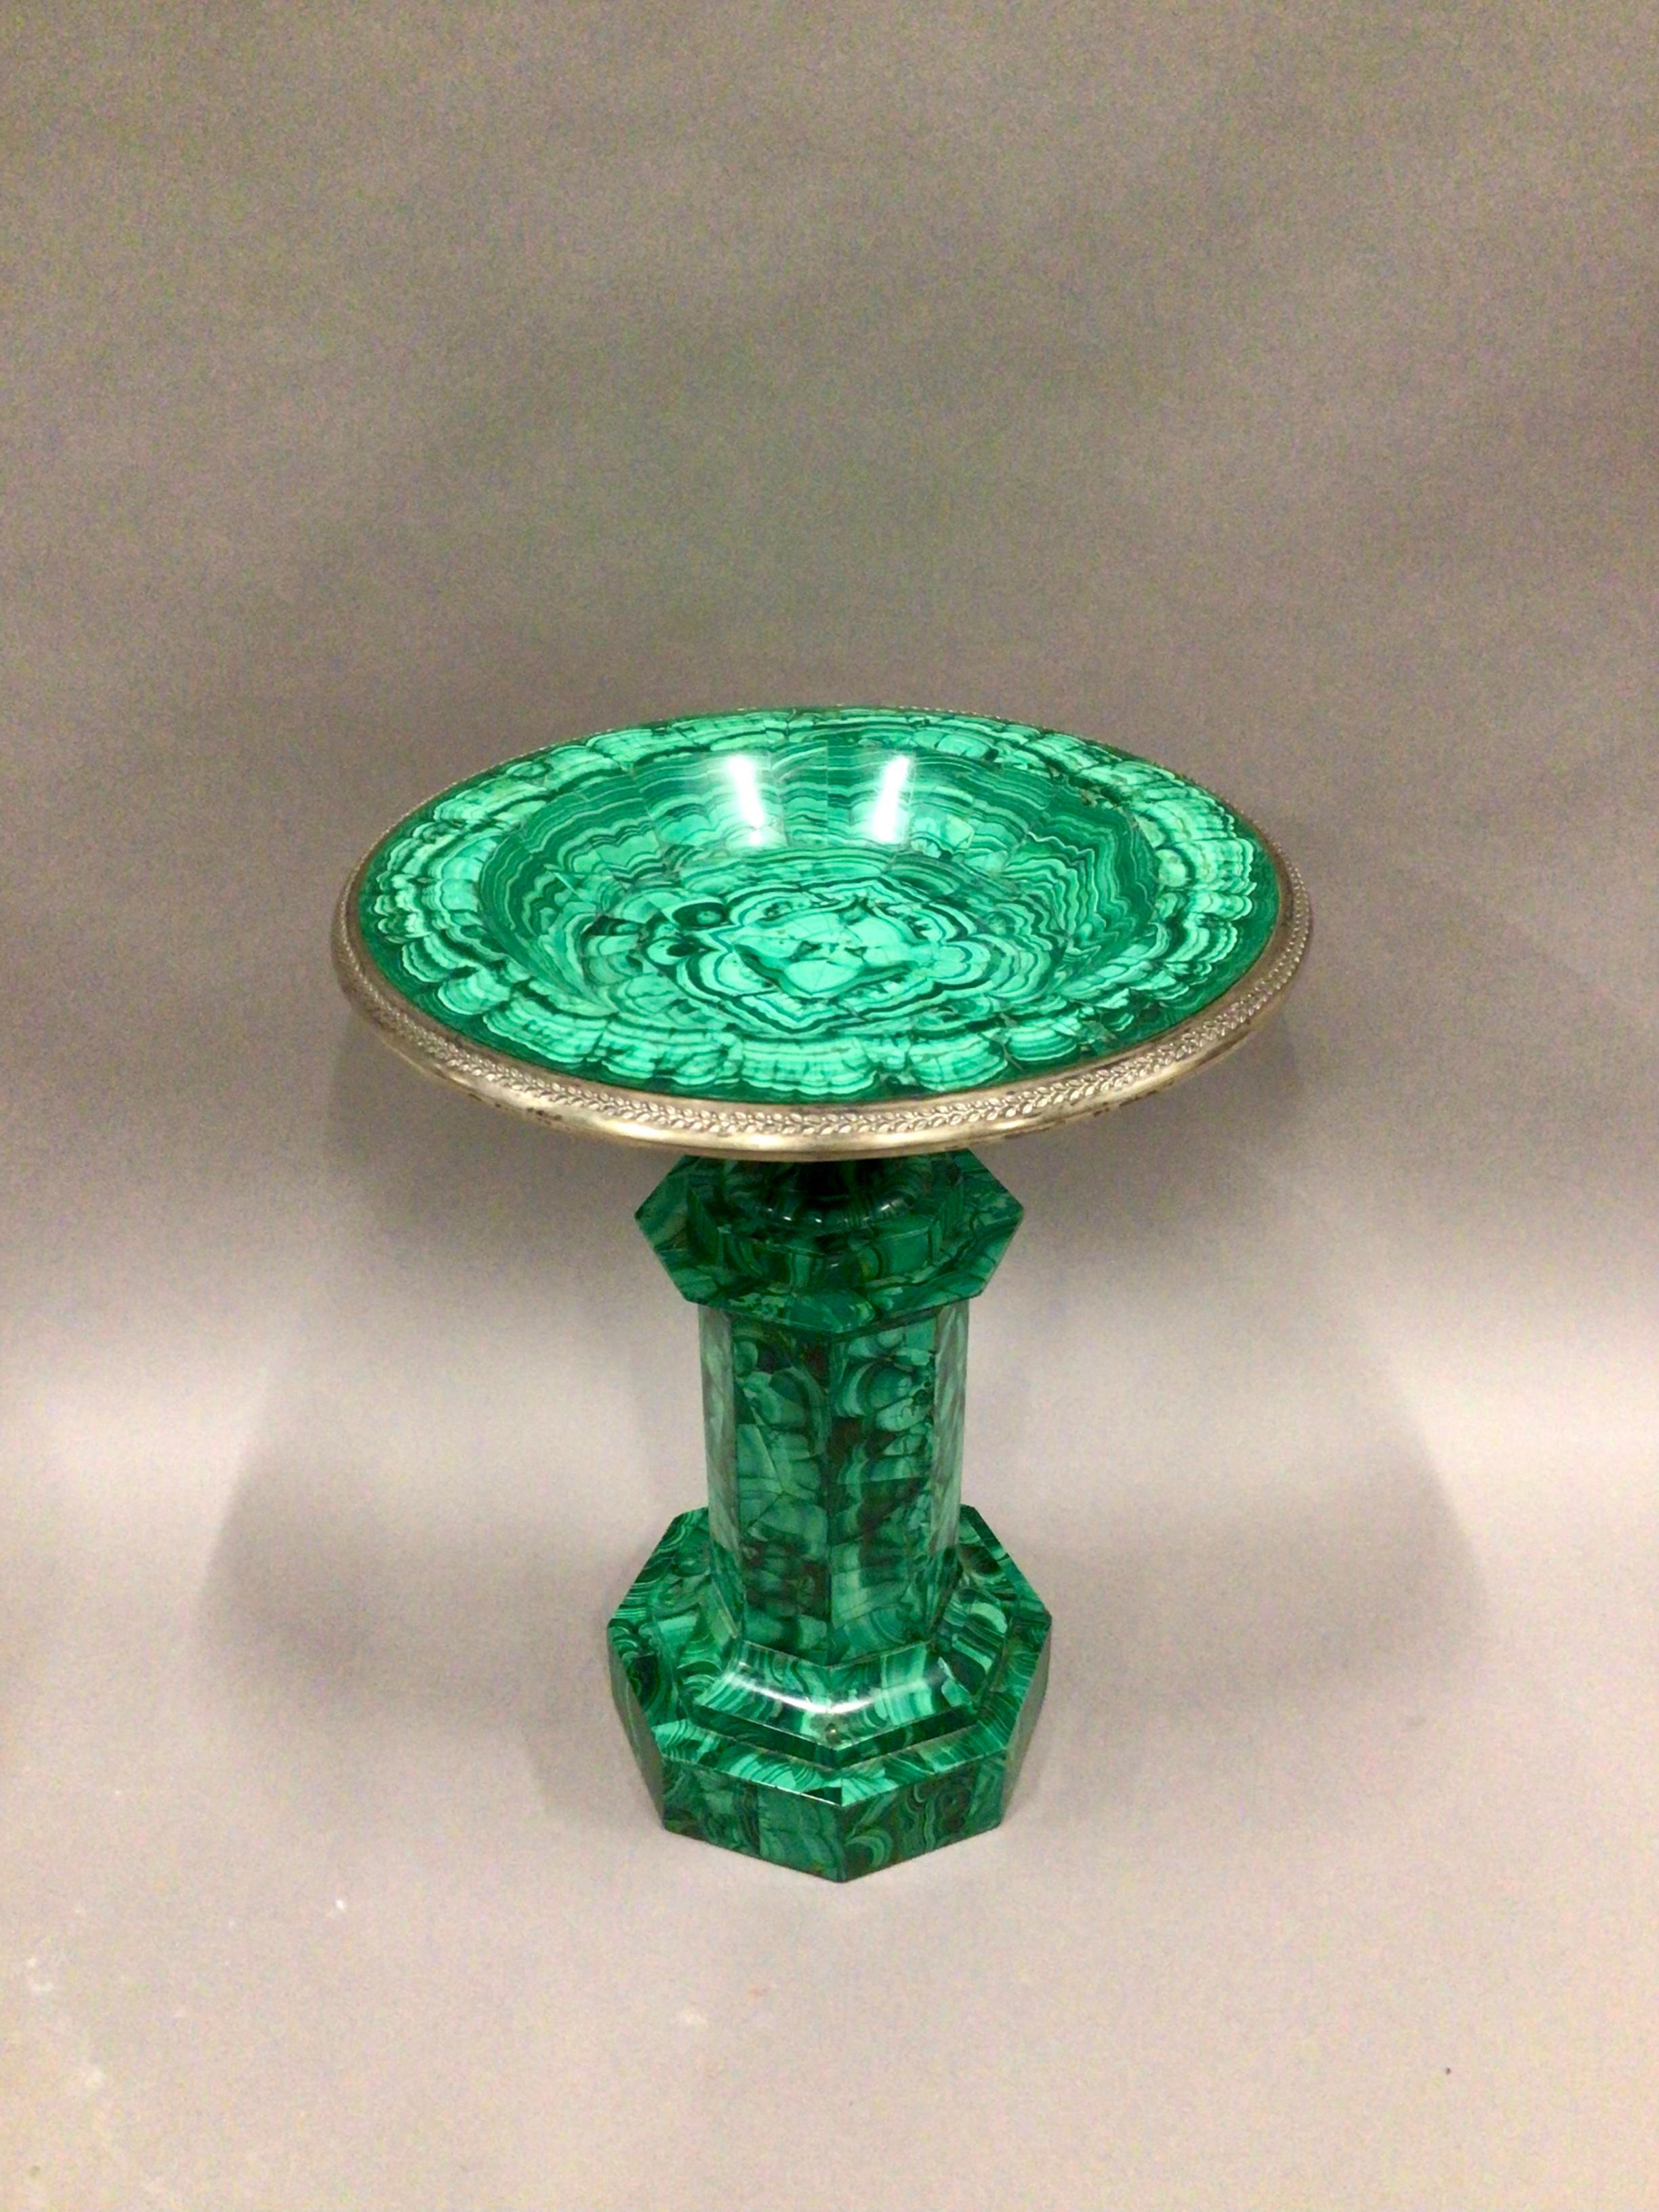 Exceptional Large C19th Malachite Tazza In Good Condition For Sale In Shipston-On-Stour, GB